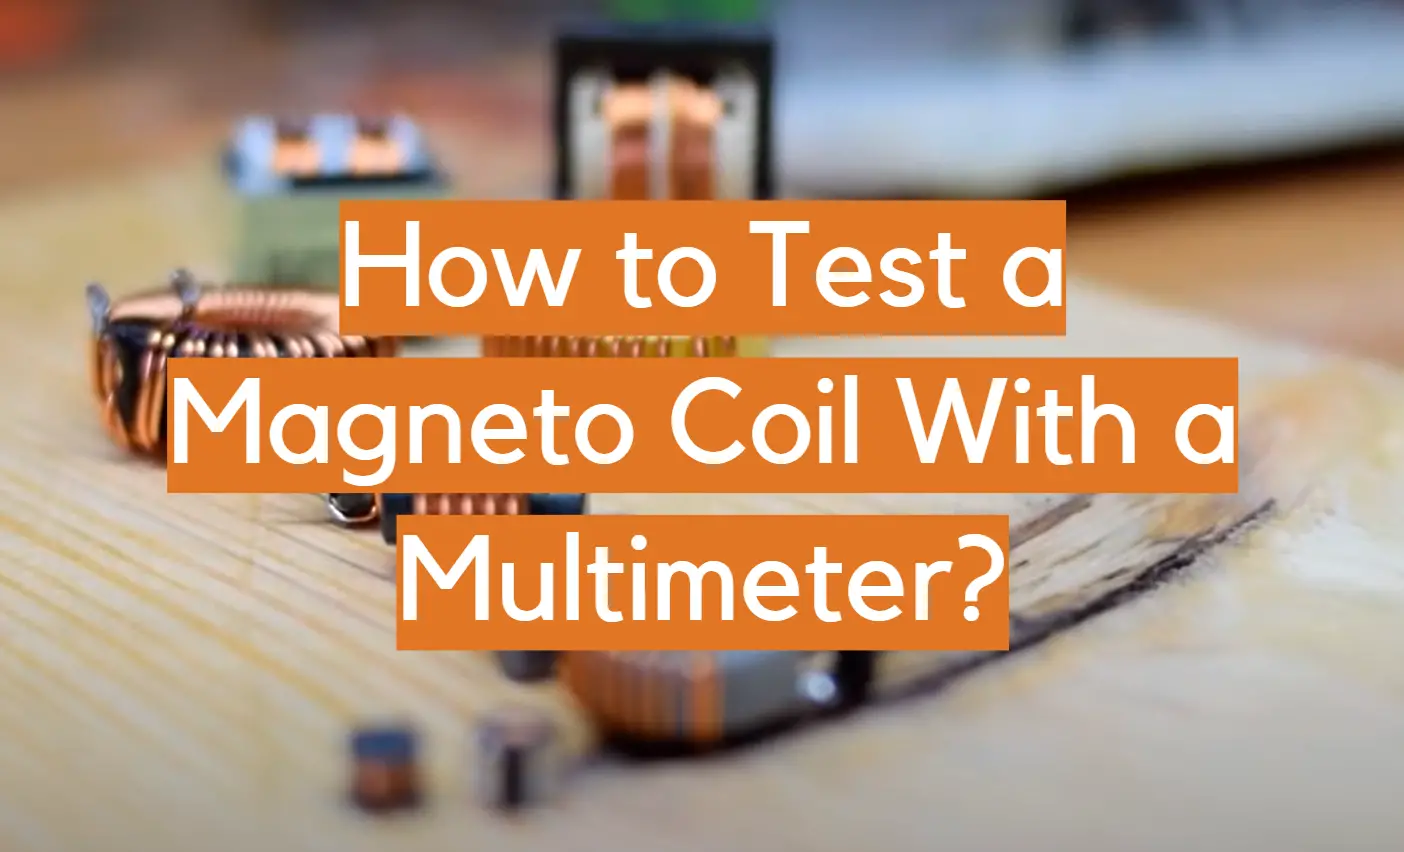 How to Test a Magneto Coil With a Multimeter?